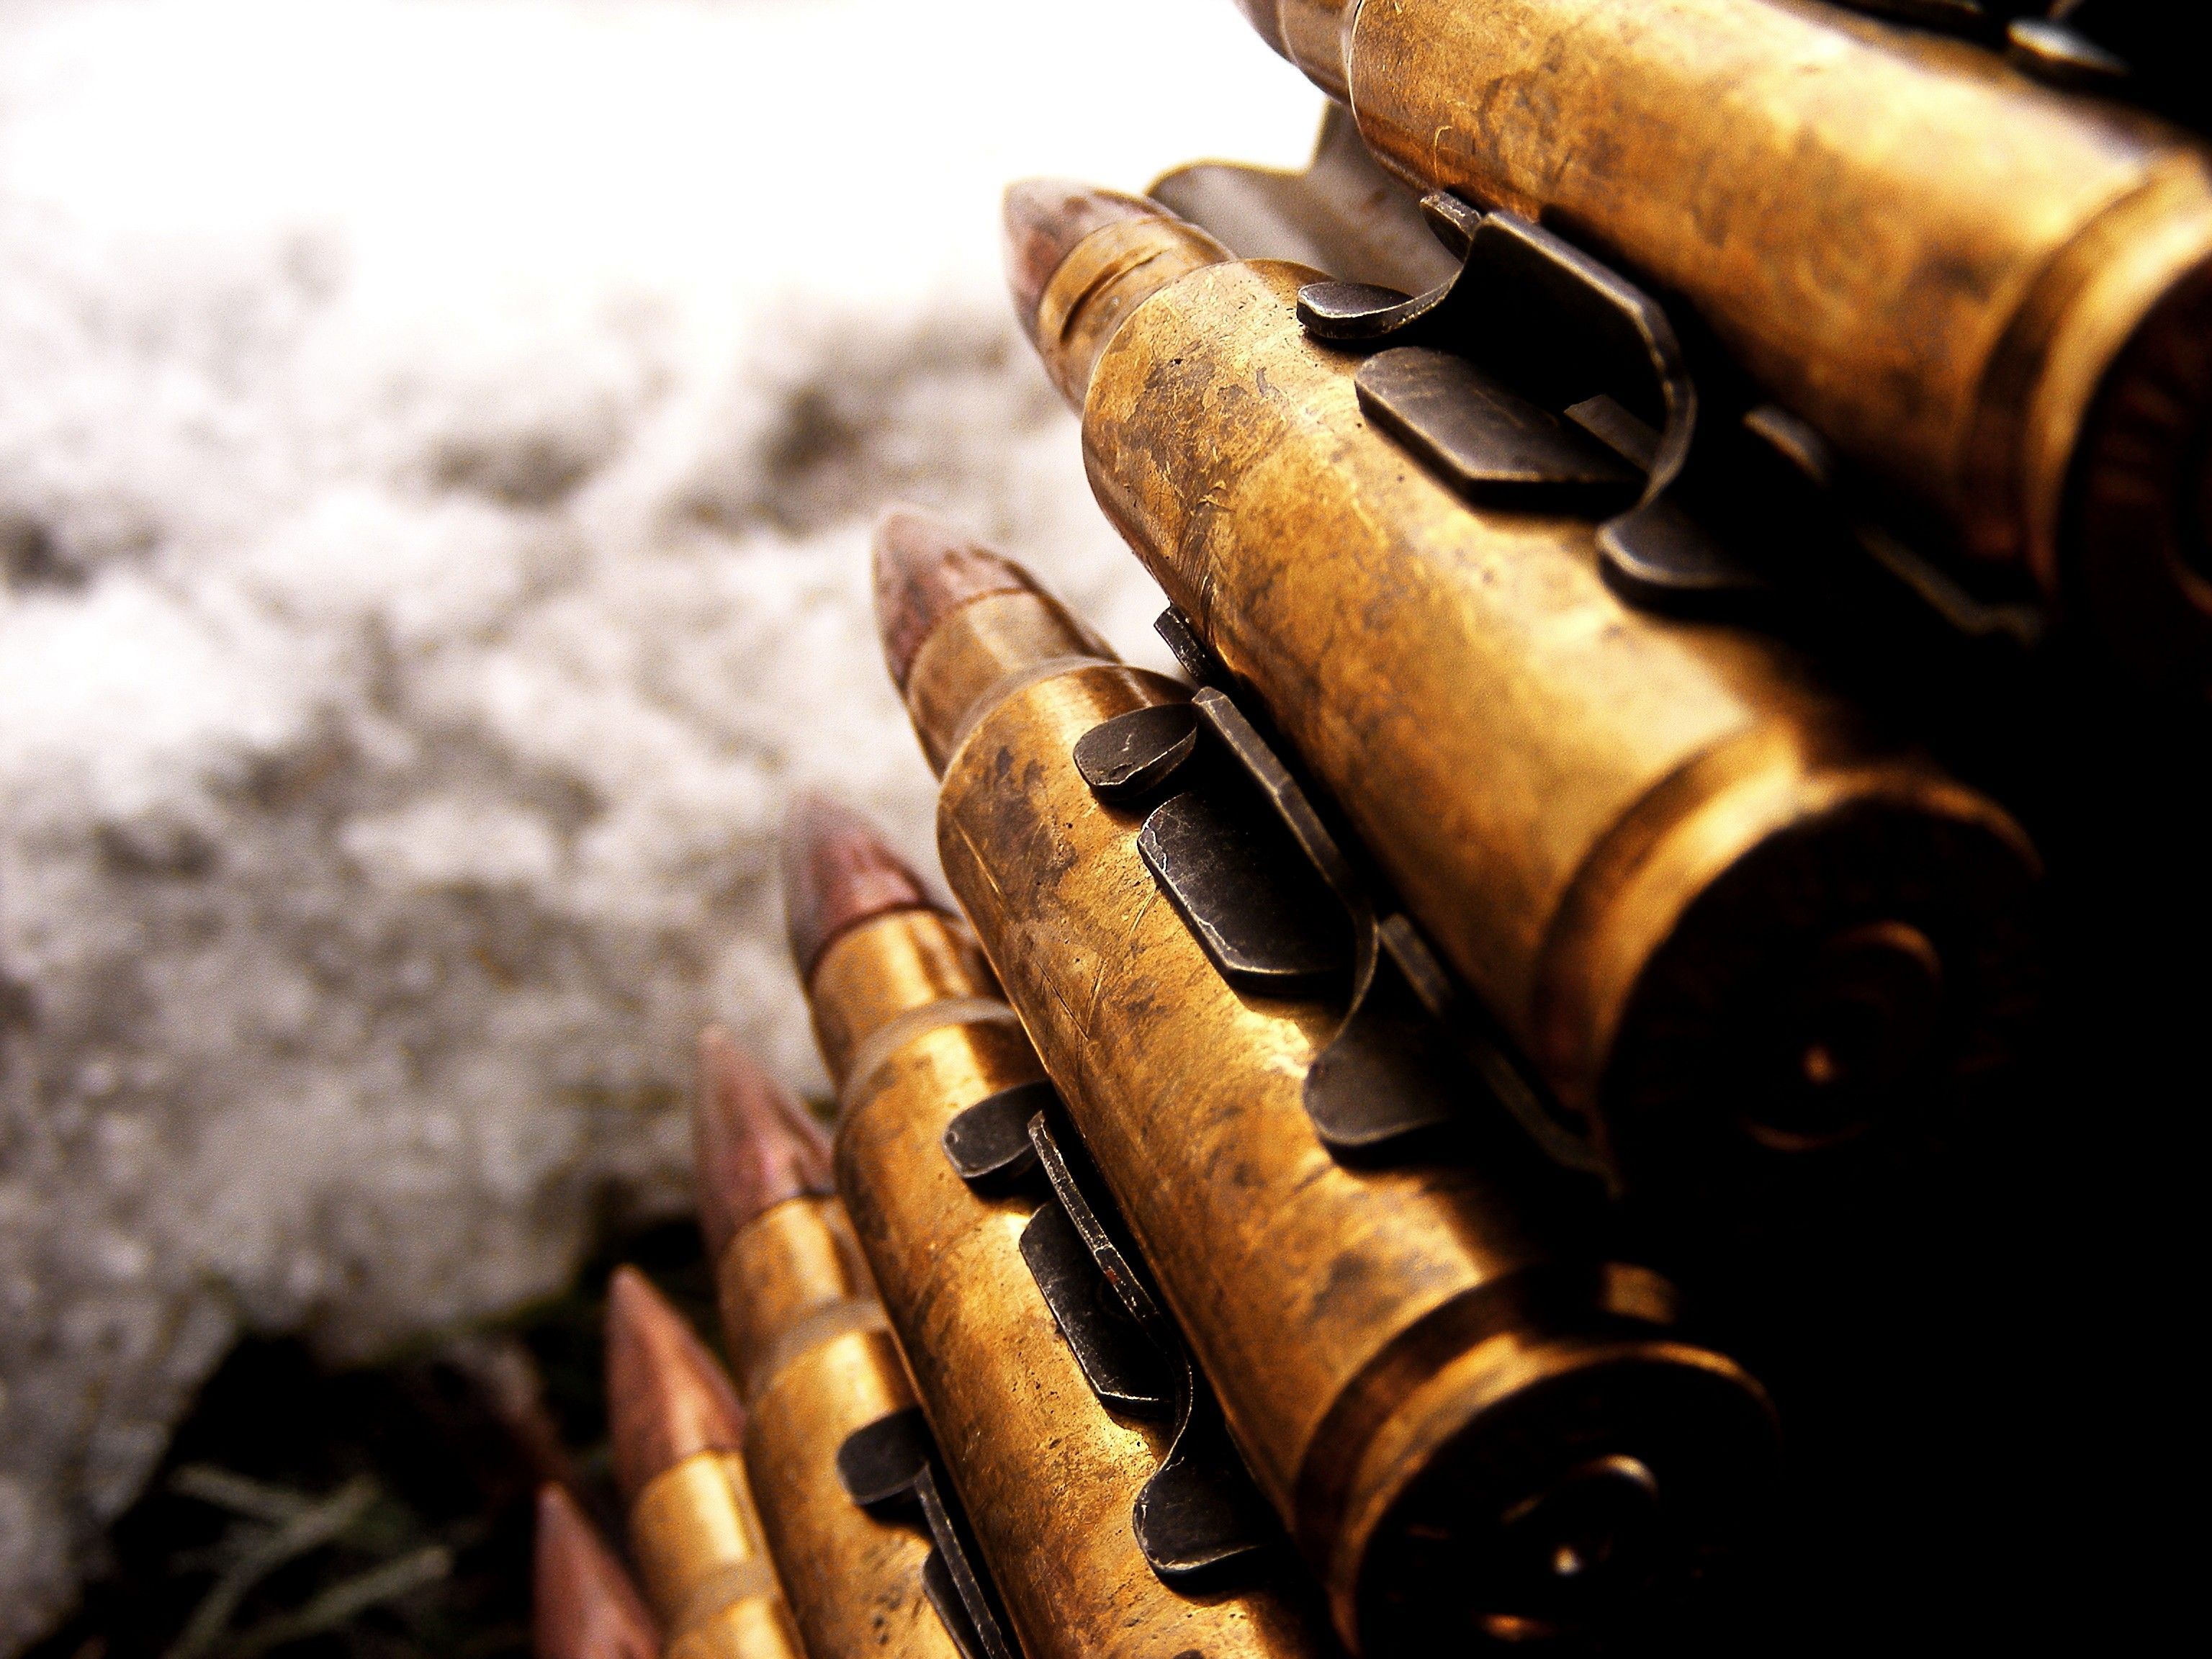 1959 Weapons HD Wallpapers Backgrounds - Wallpaper Abyss